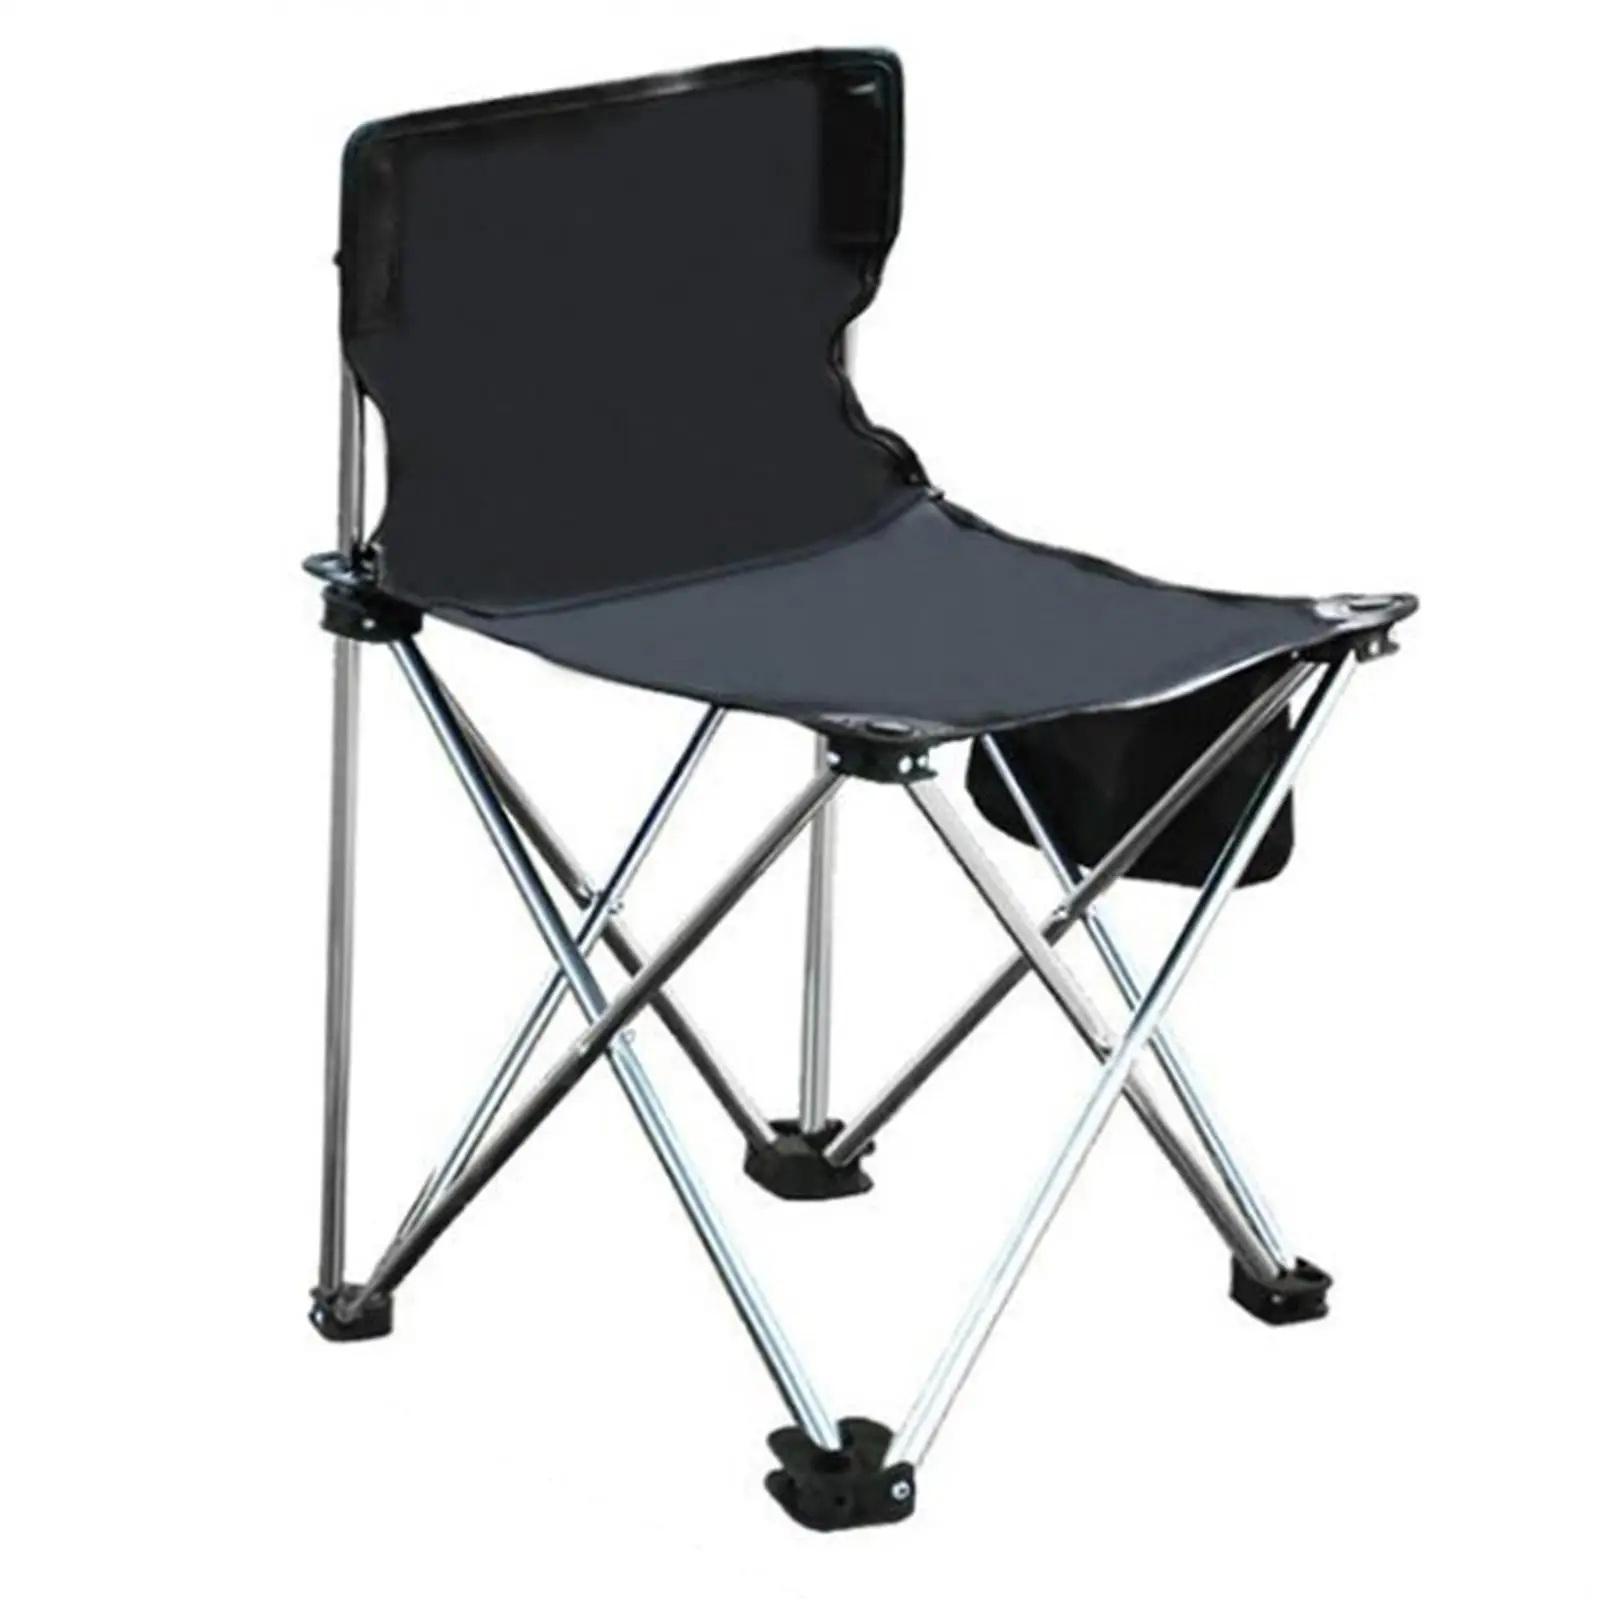 Portable Camping Chair with Side Pocket and Carrying Bag Included, Collapsible Chair for Camping, Beach, and Sports